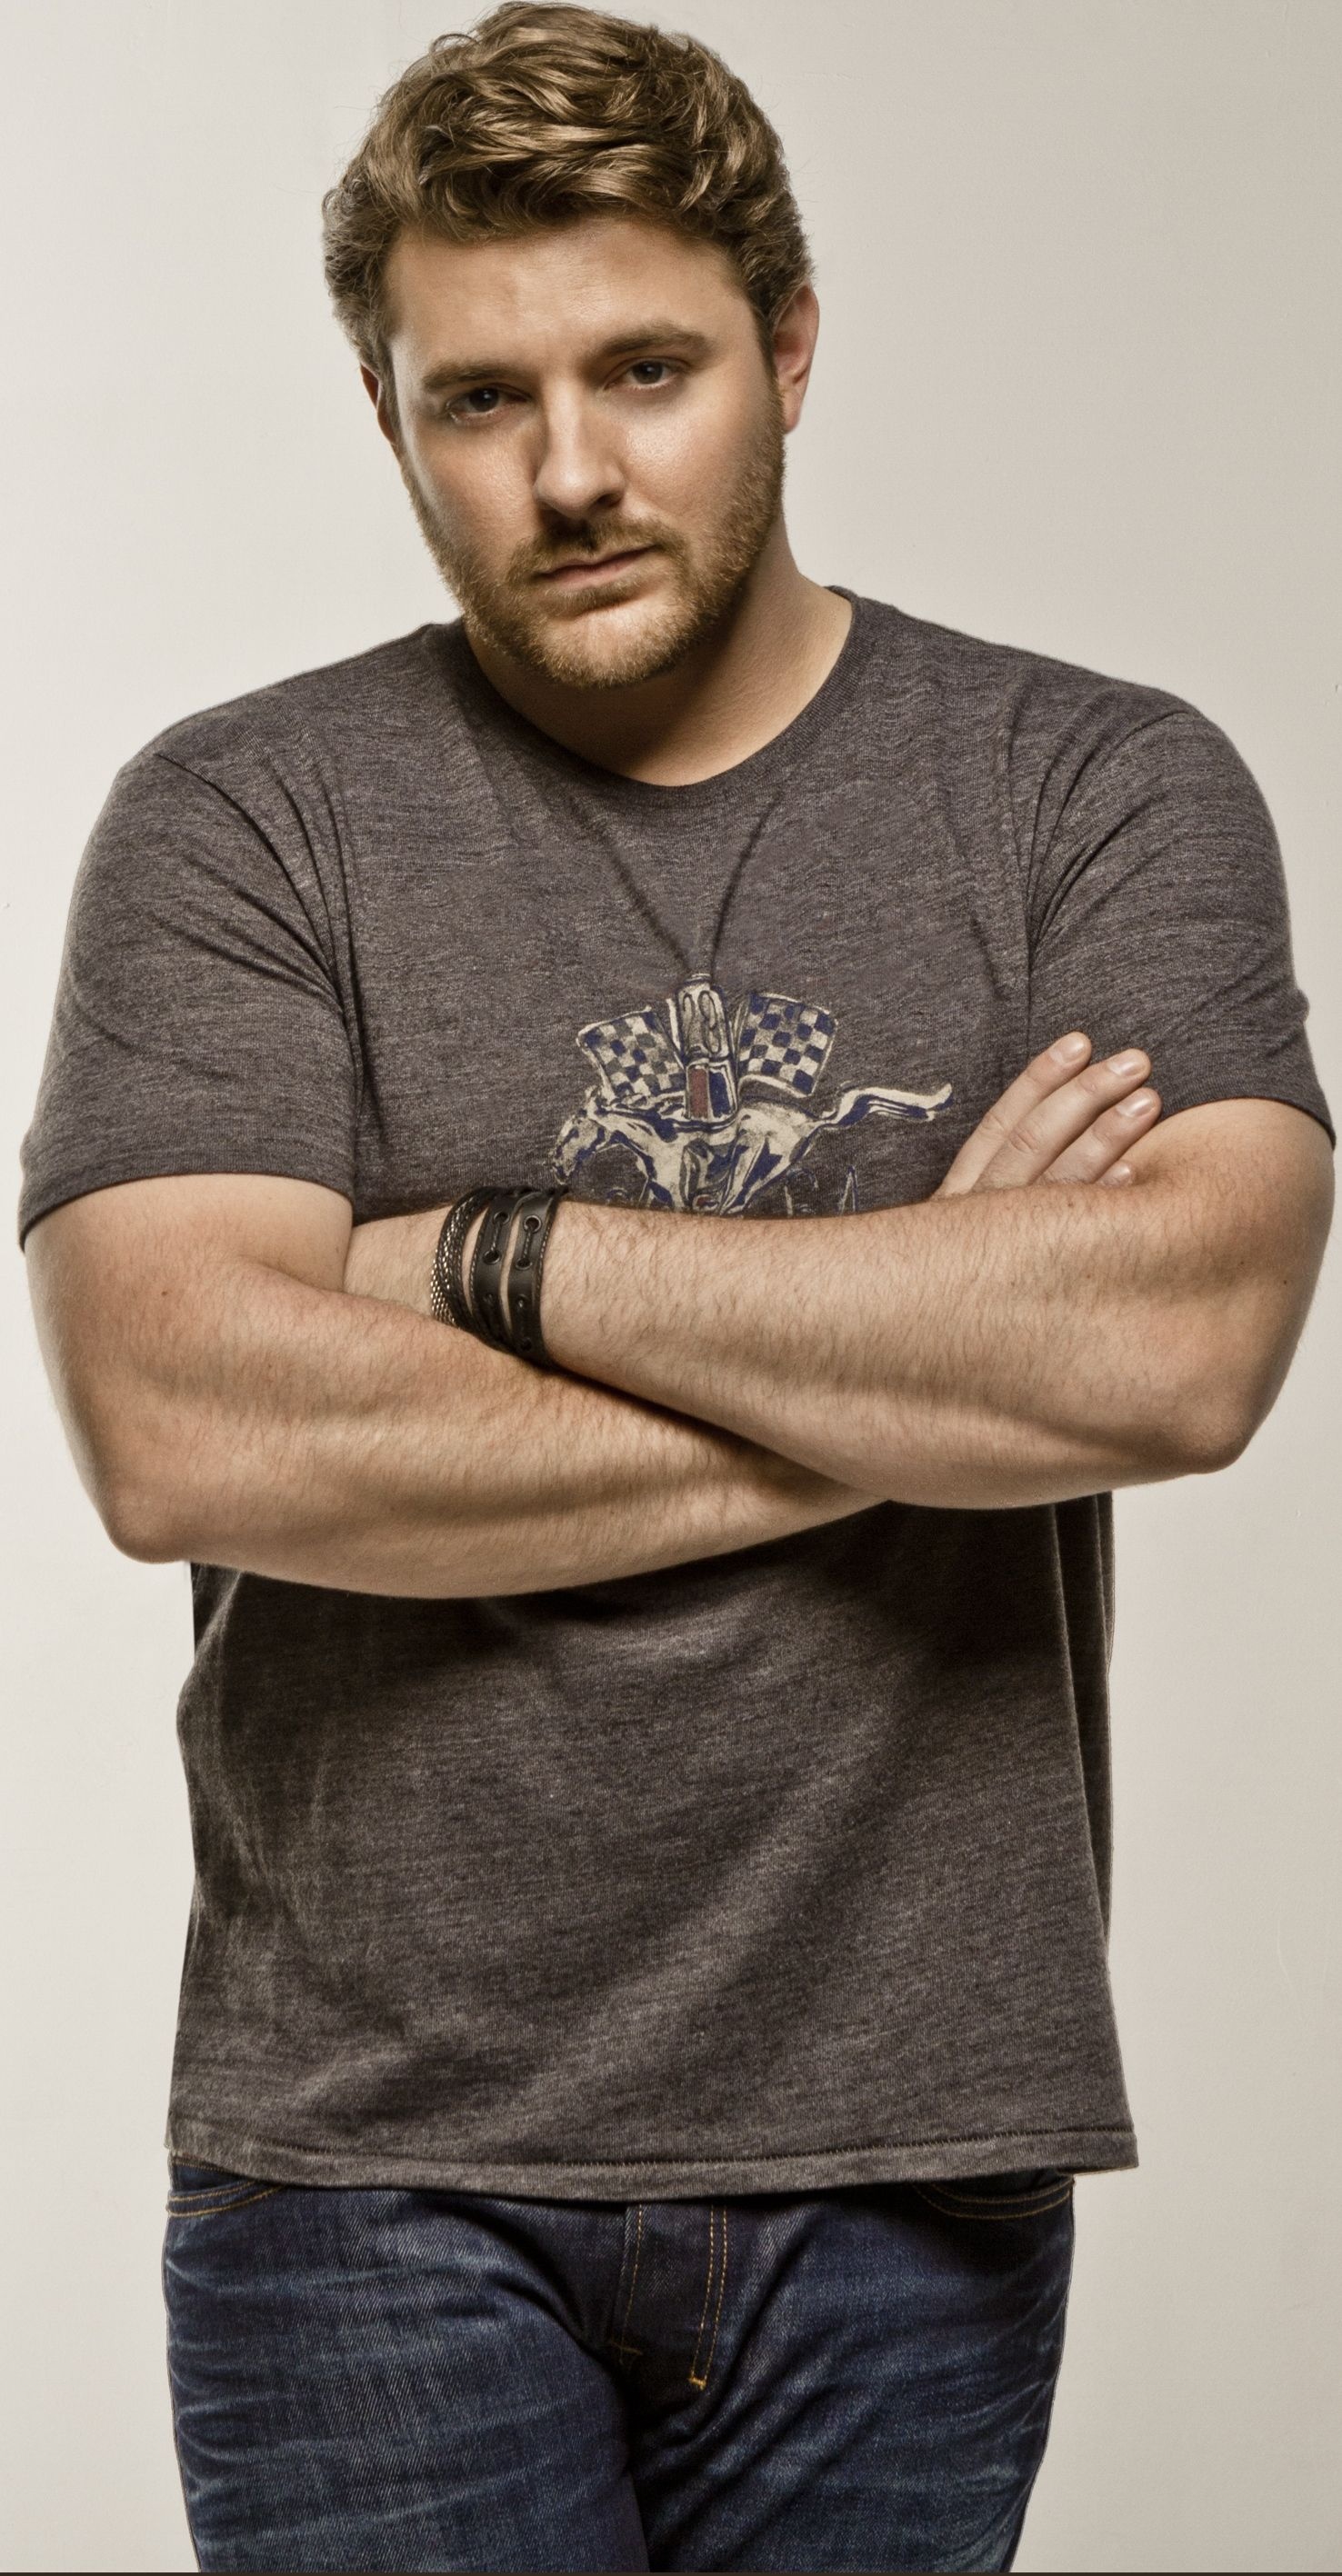 Chris Young, High-quality wallpapers, Music HQ, 4k pictures, 1480x2840 HD Phone